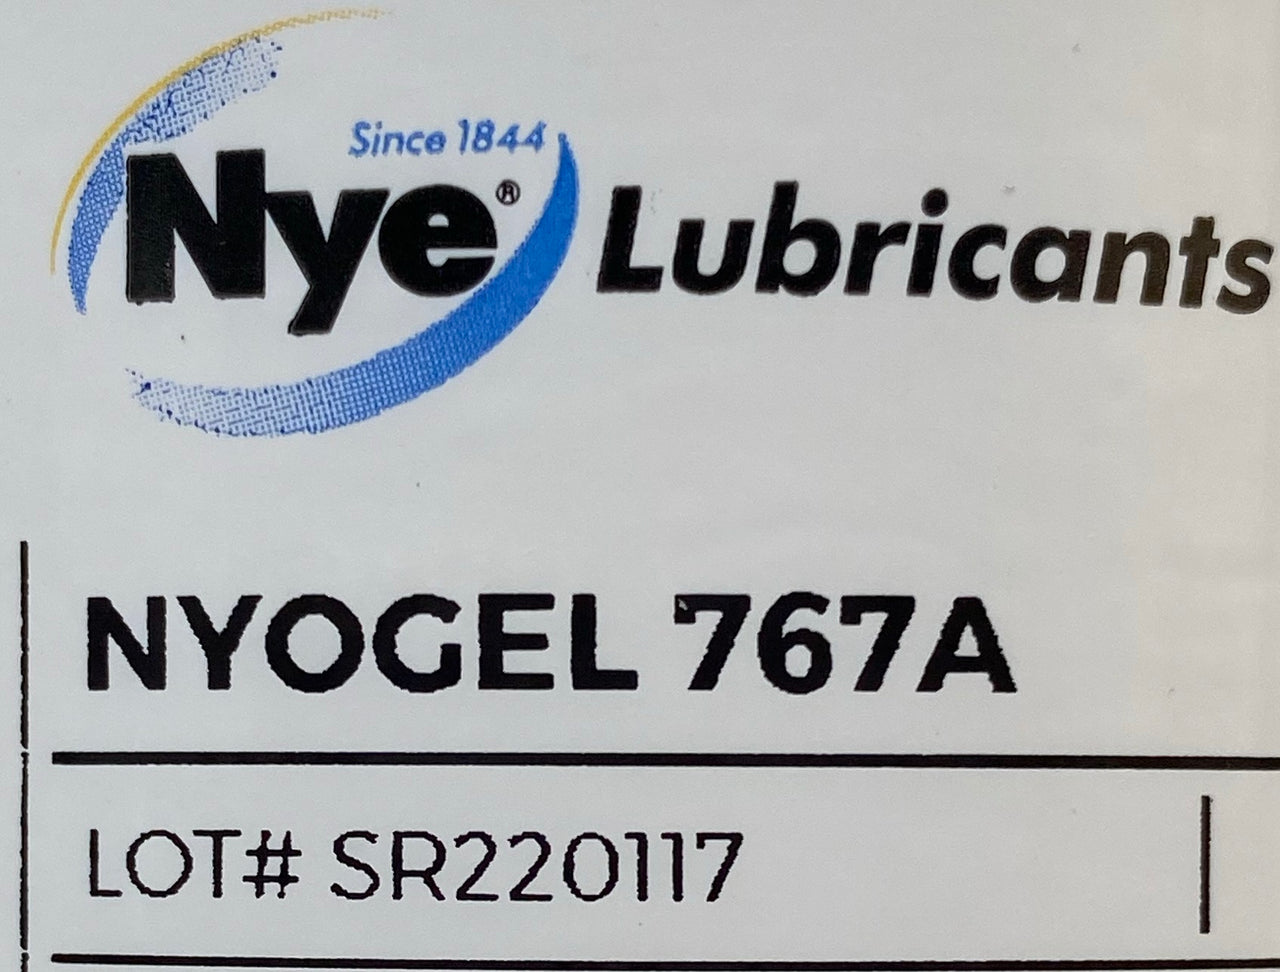 Nyogel 767A synthetic damping grease